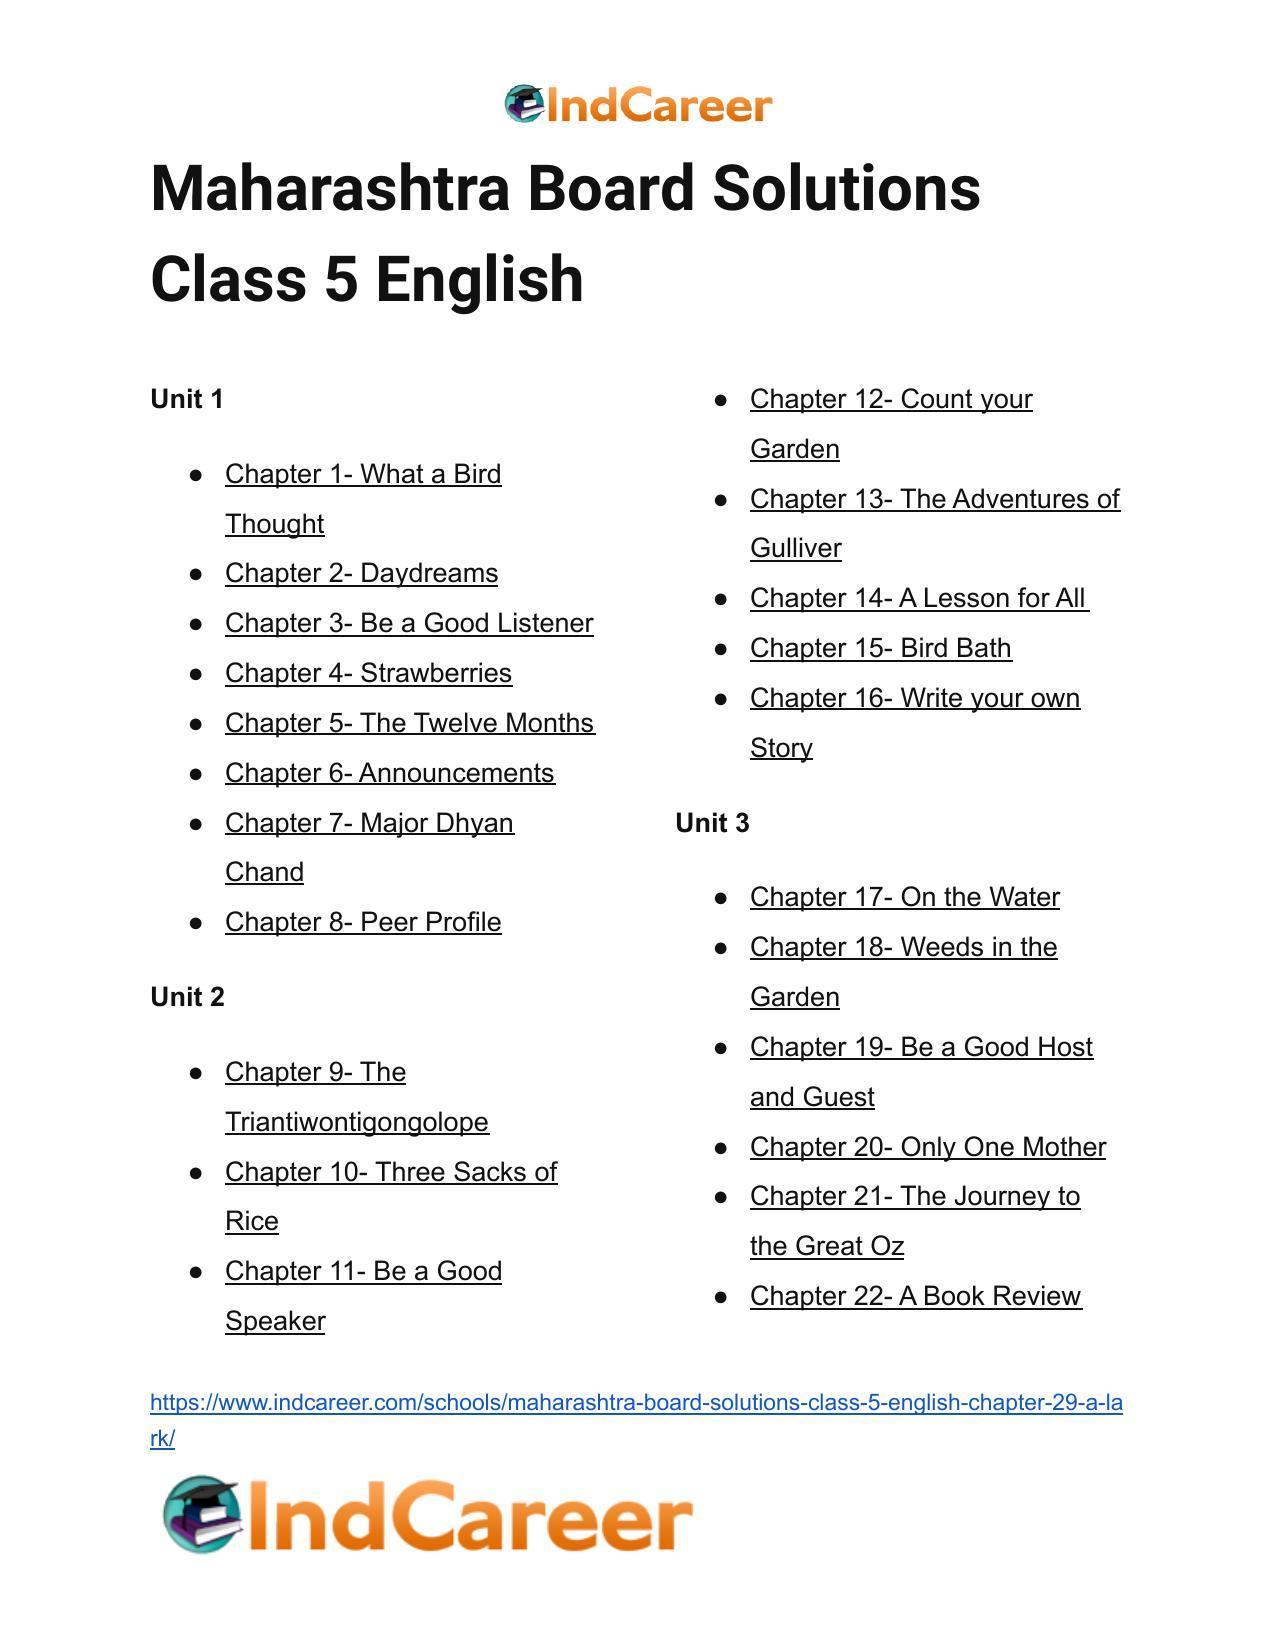 Maharashtra Board Solutions Class 5-English: Chapter 29- A Lark - Page 9